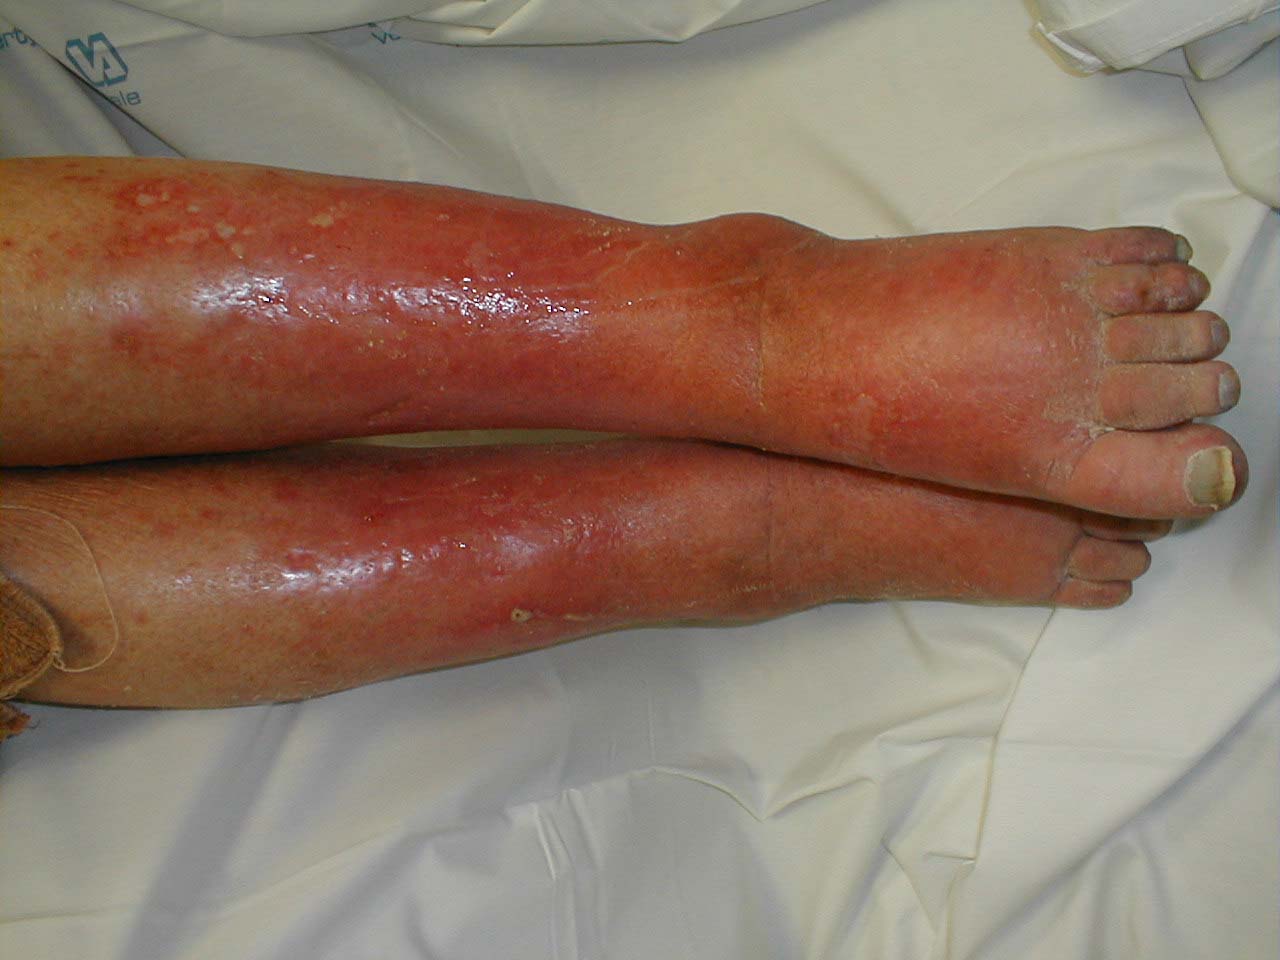 Picture of infection legscellulitis .